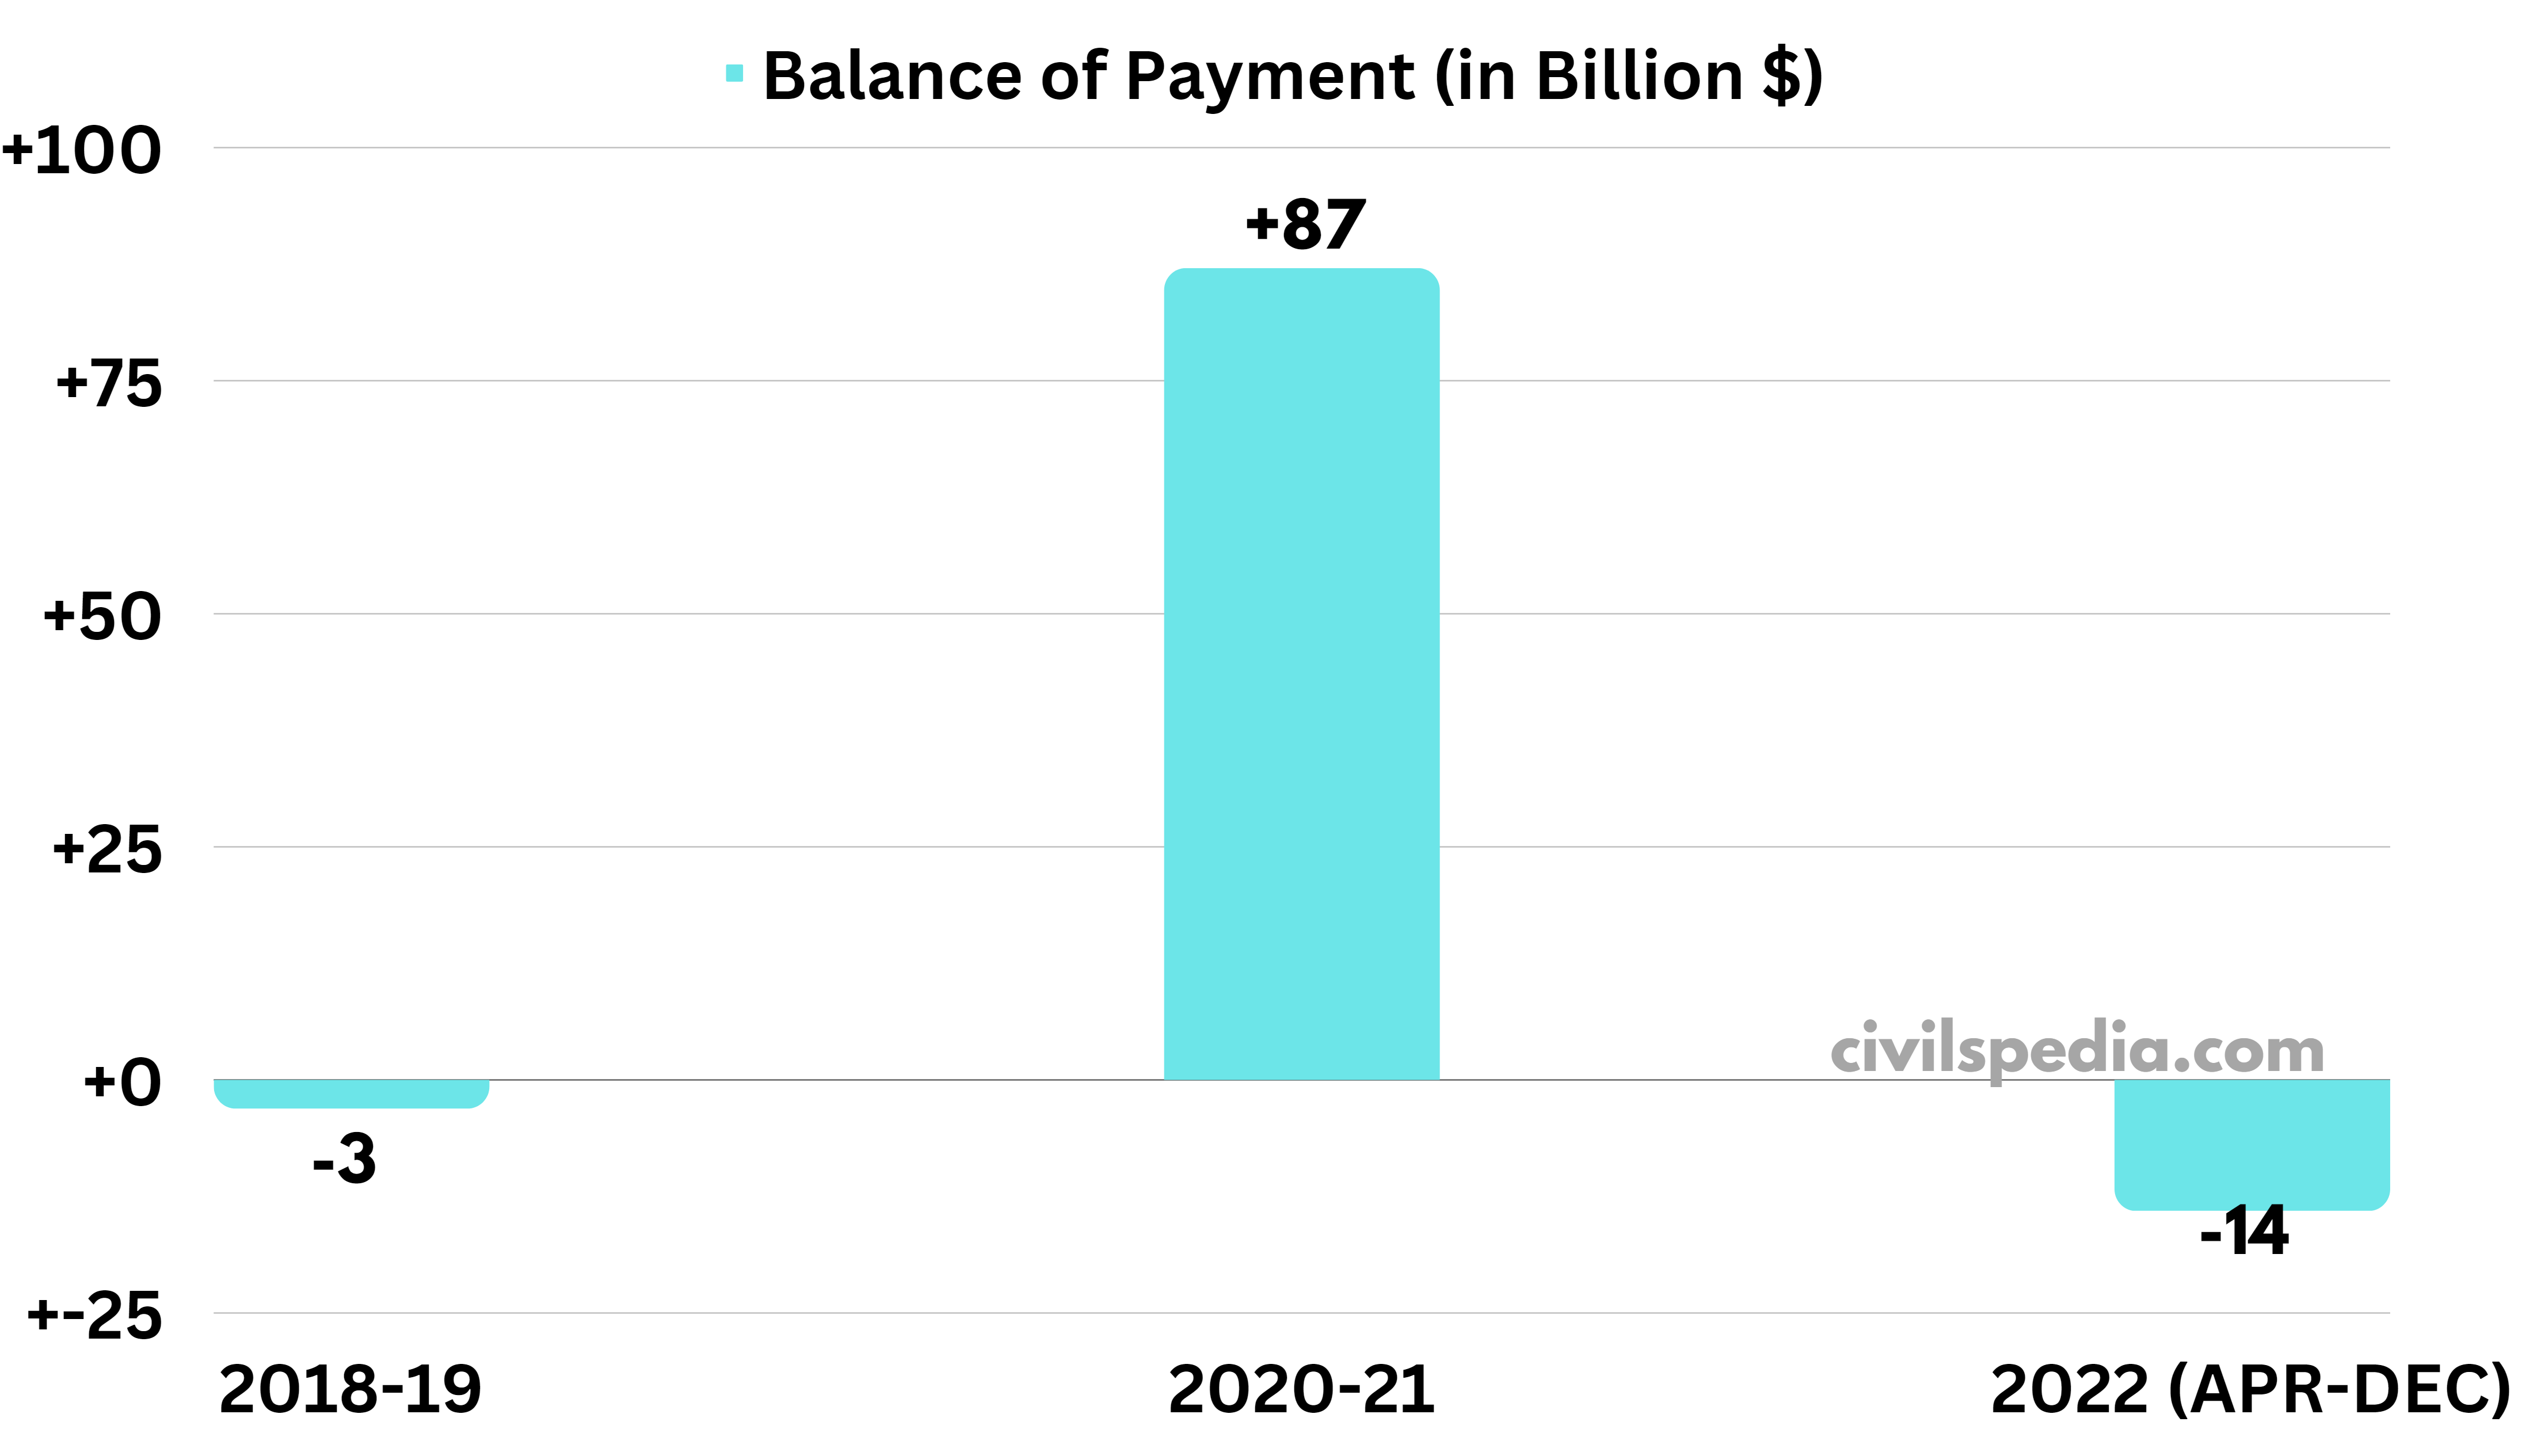 Trends of Balance of Payment in India in previous years